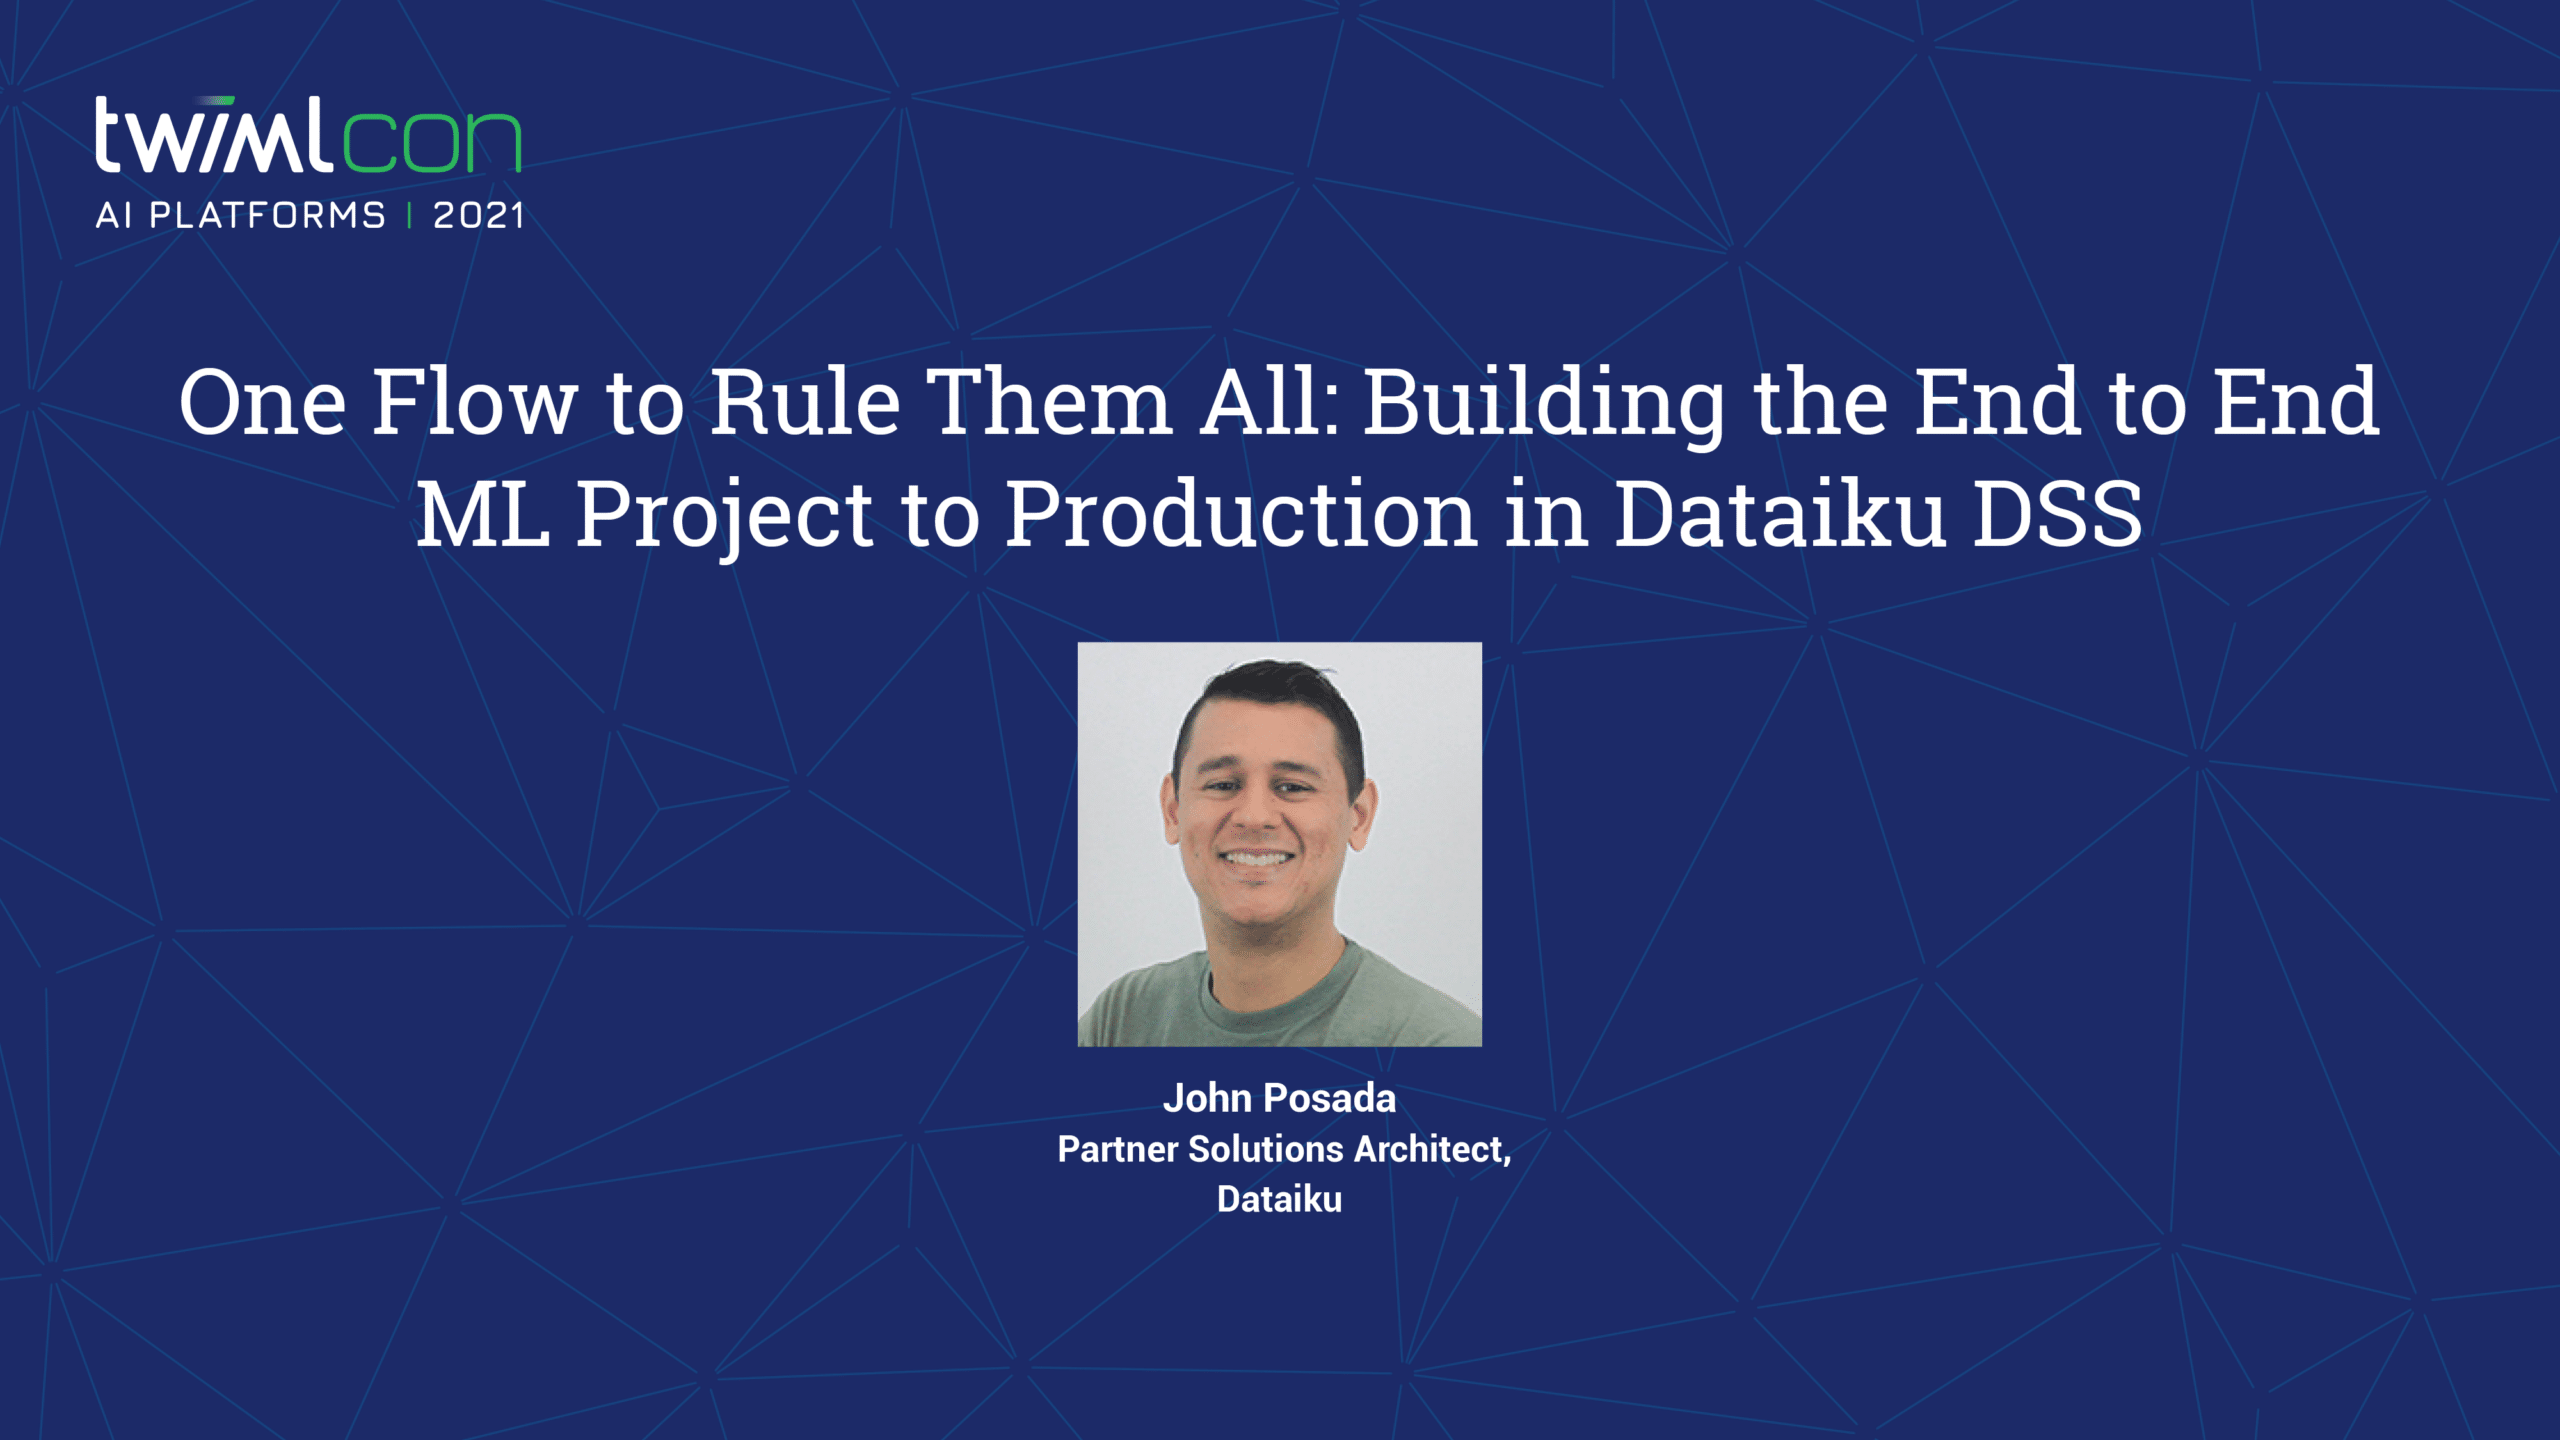 One Flow to Rule Them All: Building the end to end ML project to production in Dataiku DSS